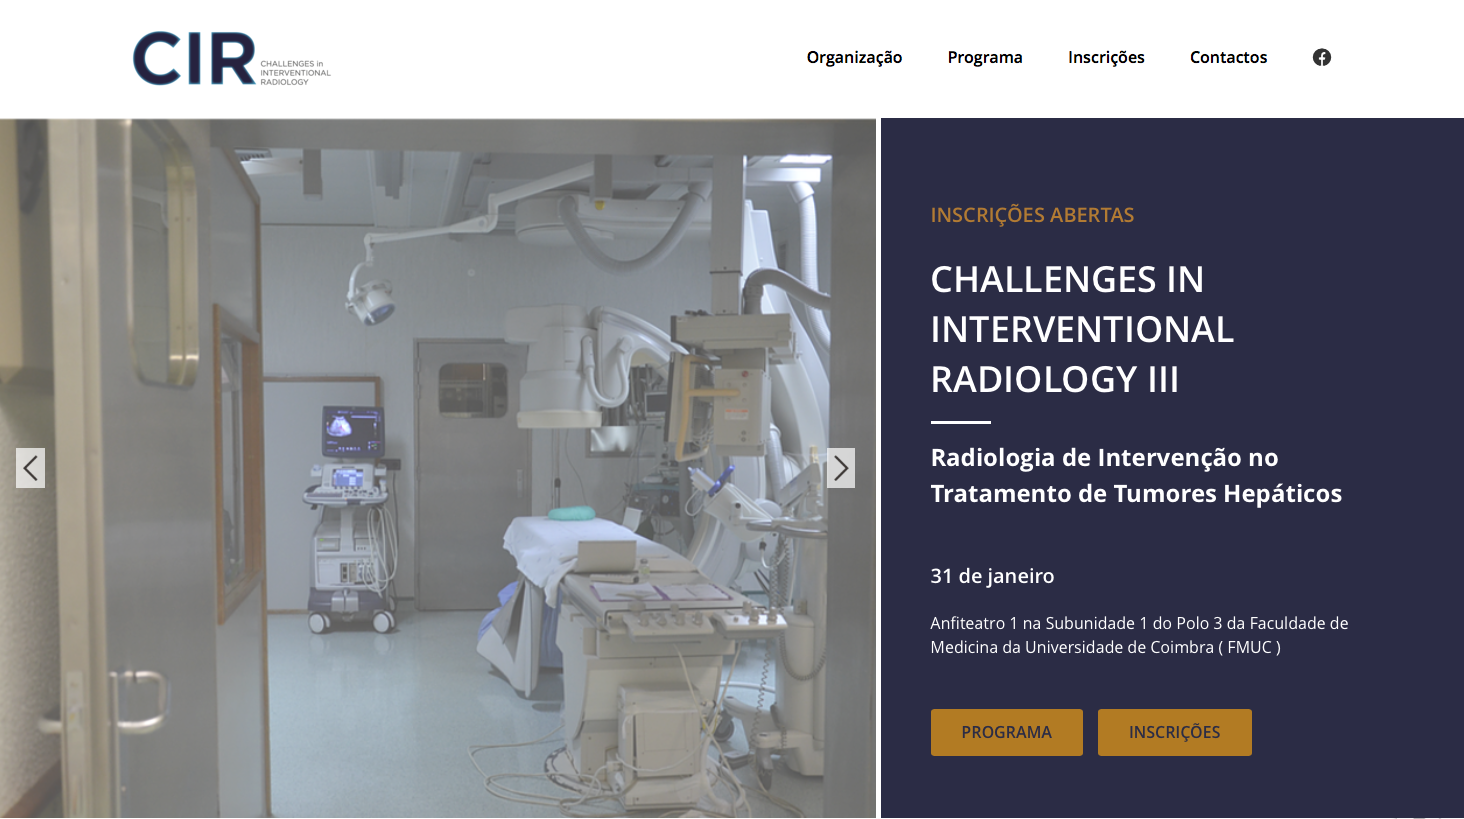 Challenges in Interventional Radiology III